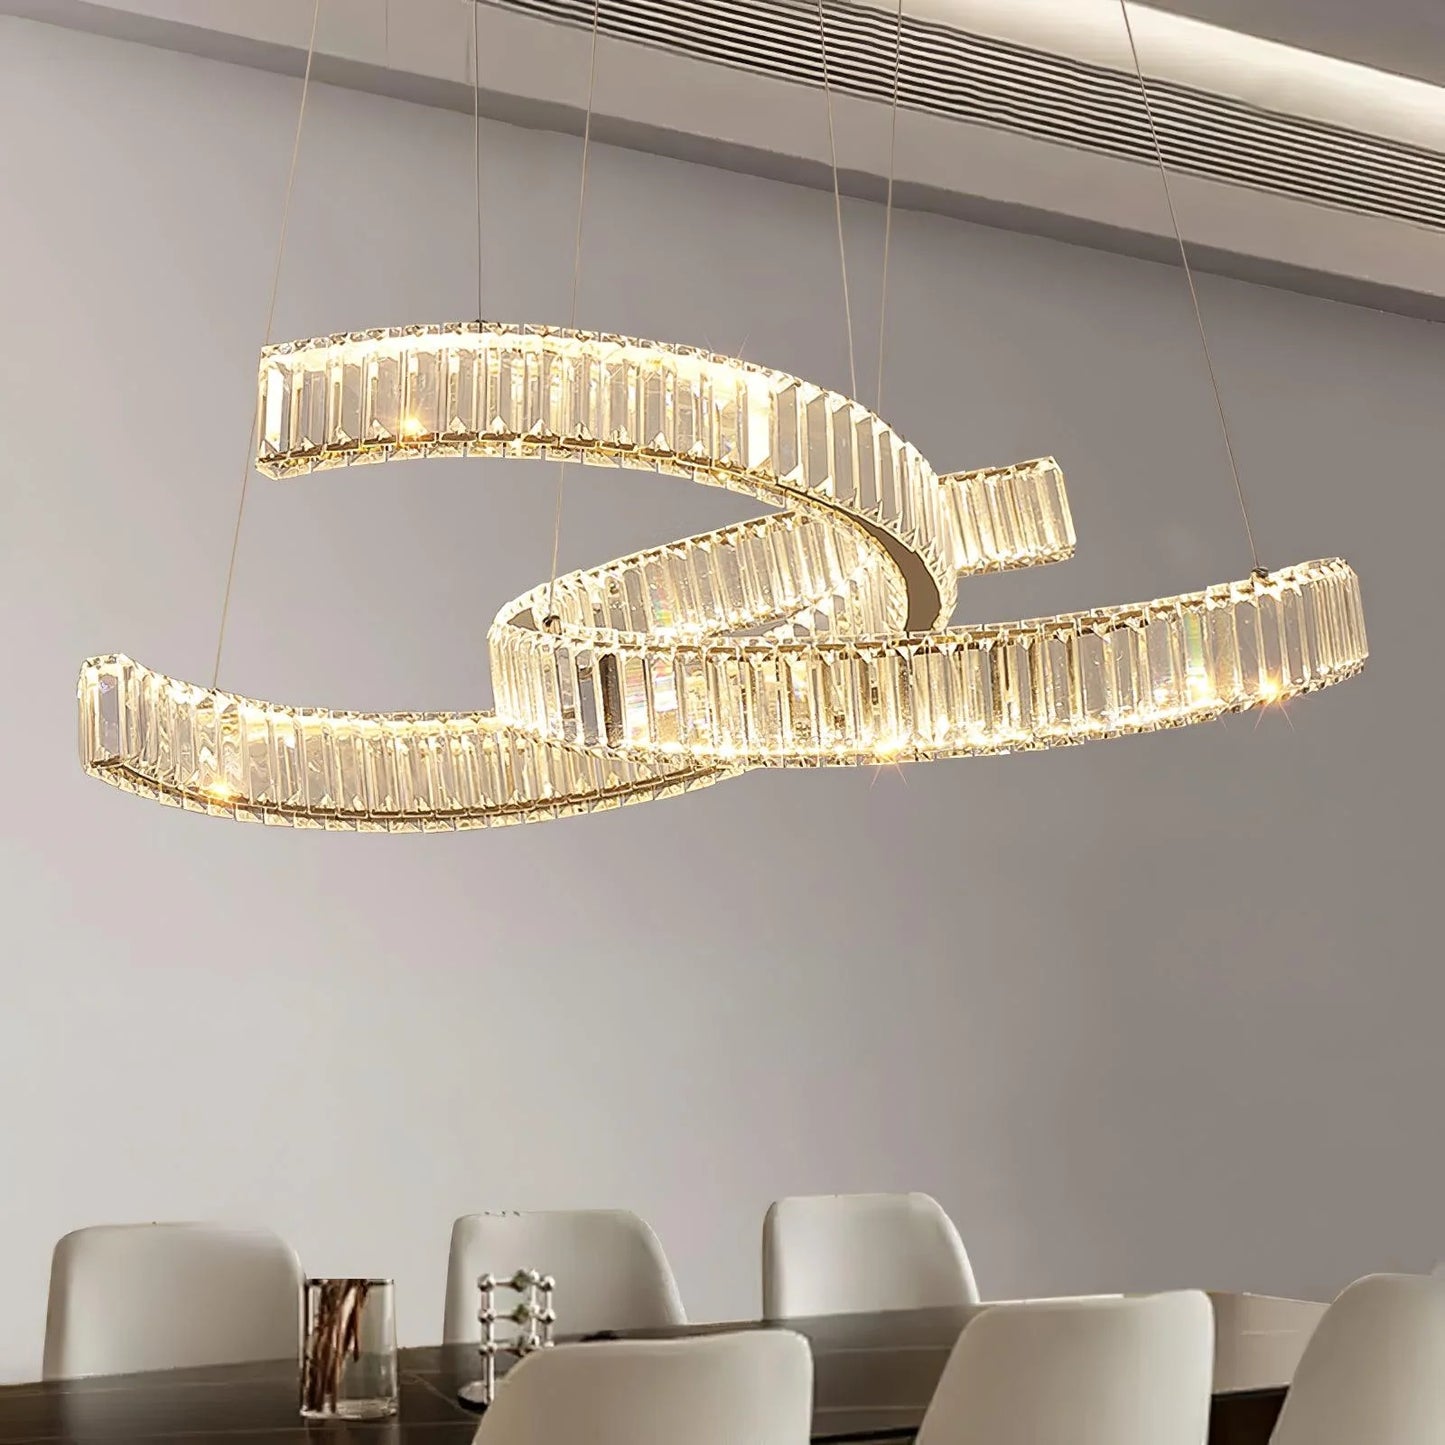 Load image into Gallery viewer, Double C LED Chandelier Light by Gloss (9035)
